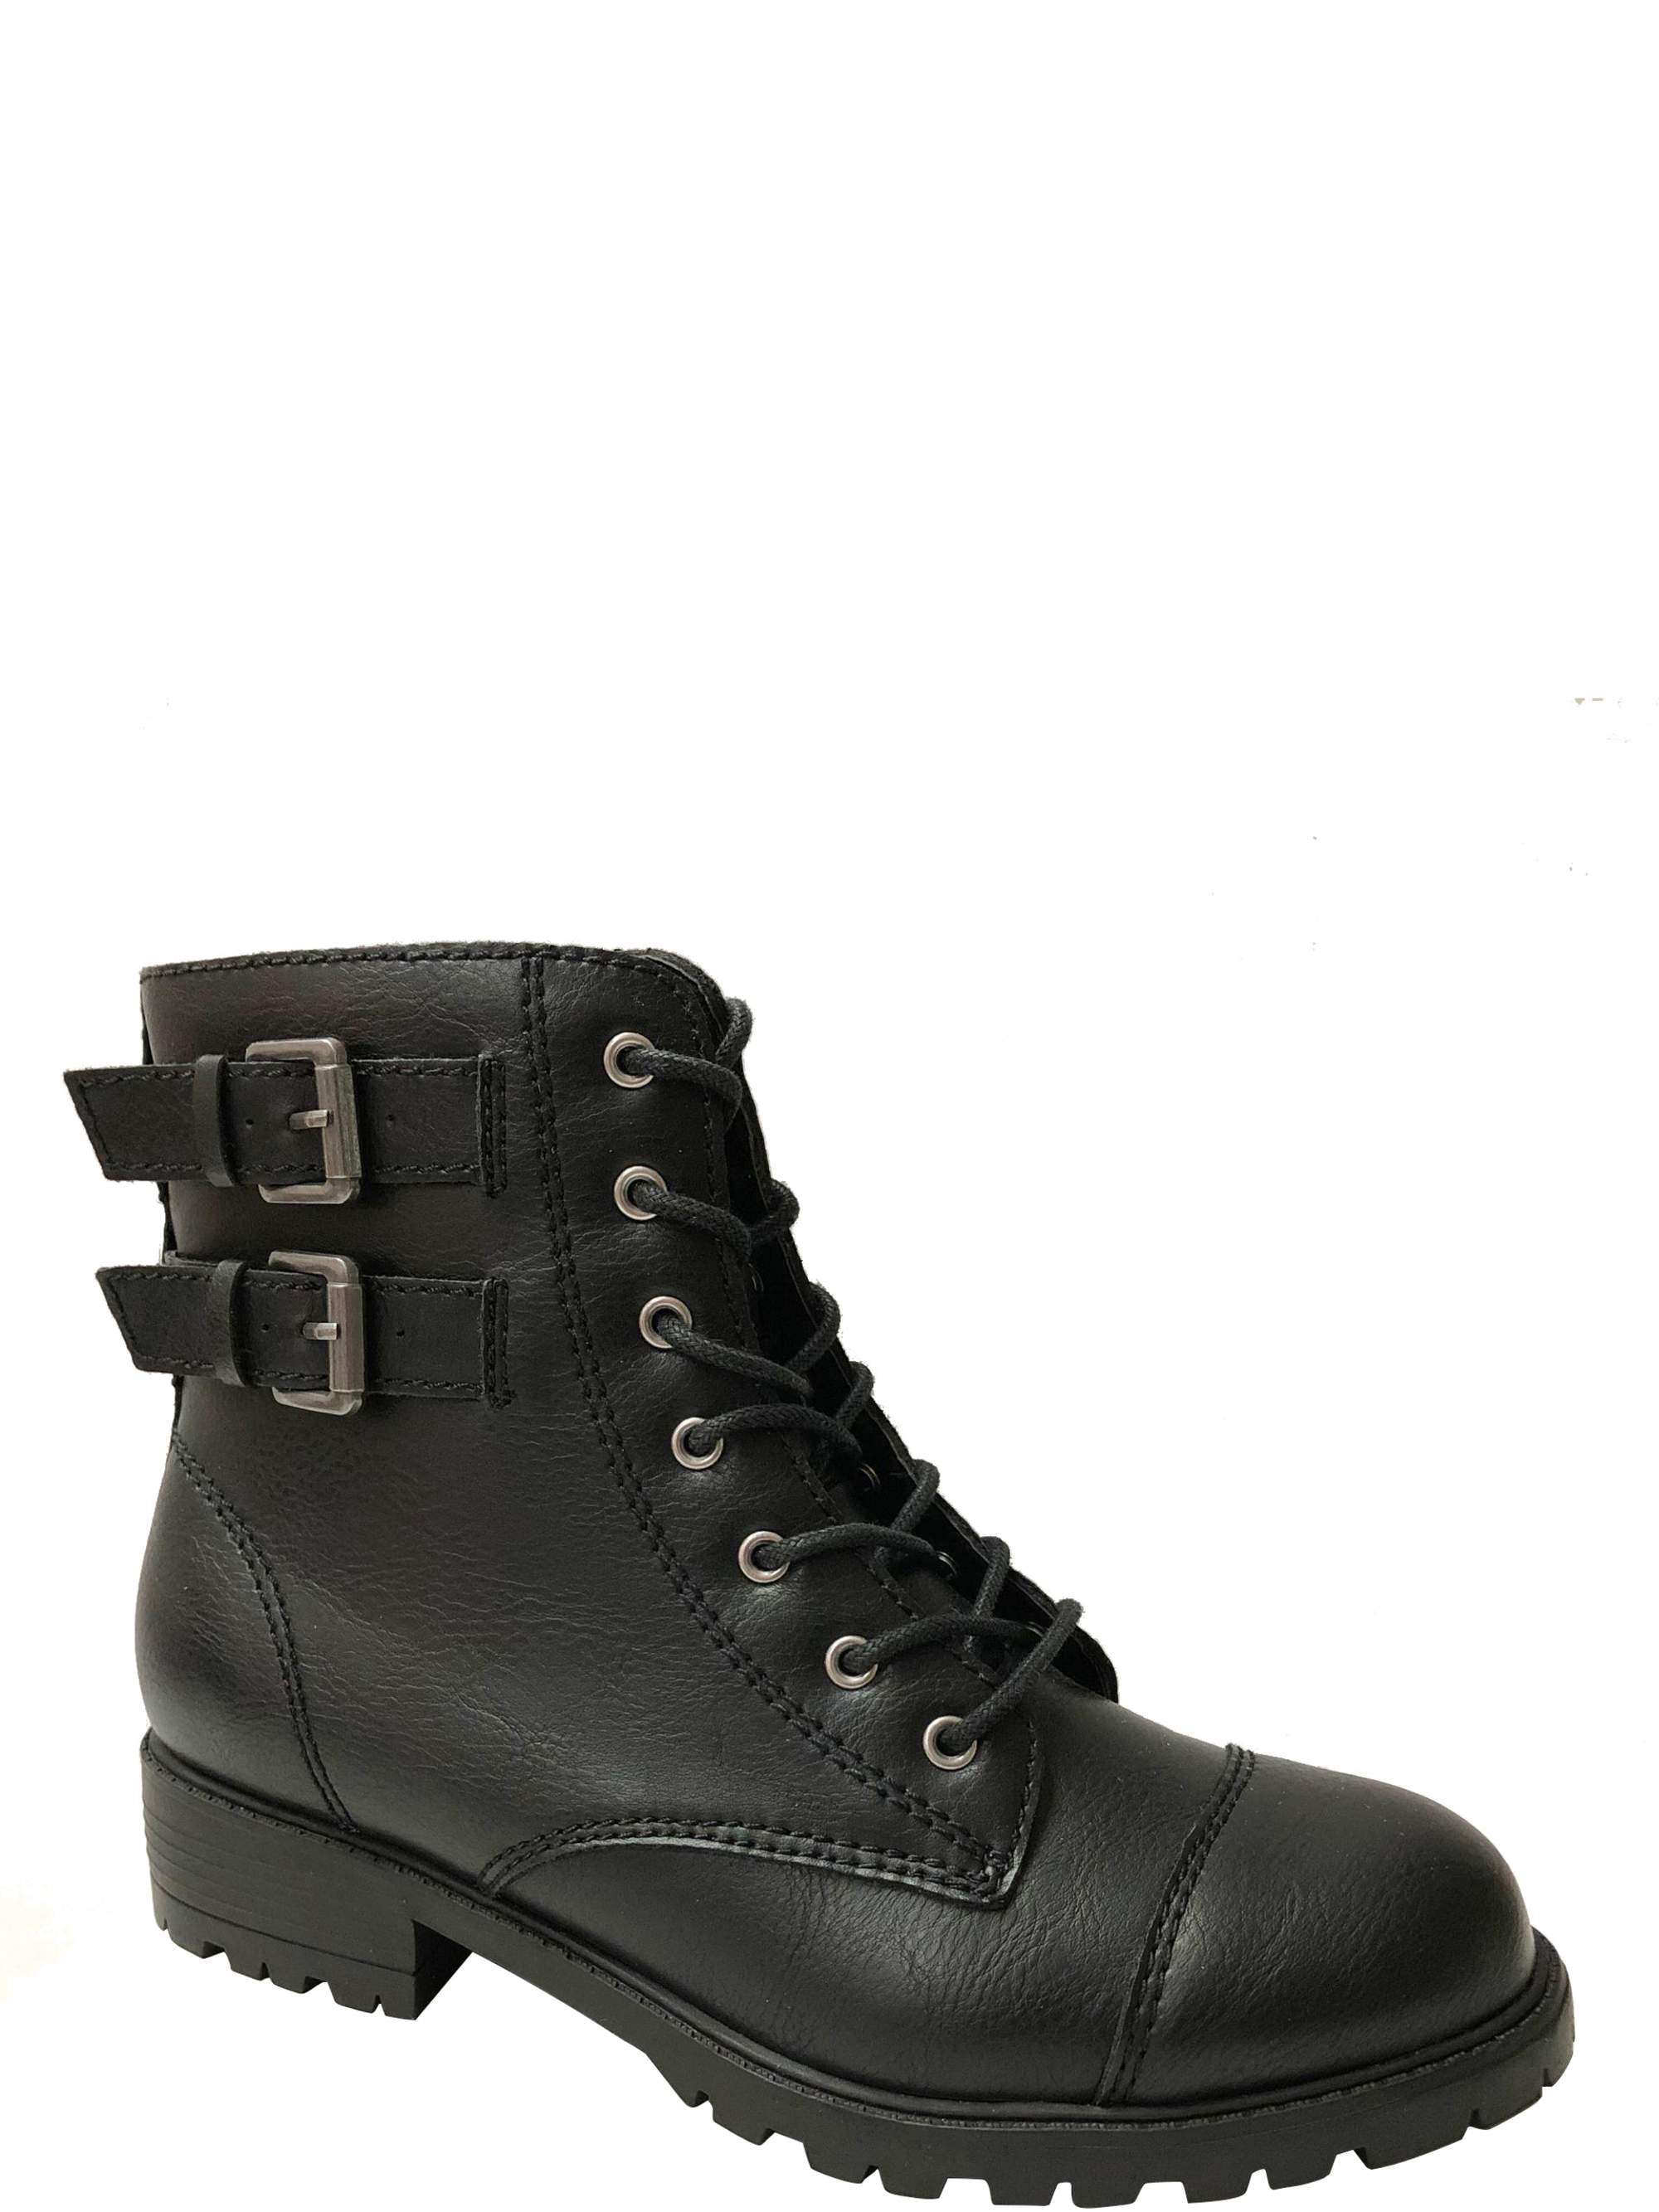 black combat boots for toddlers